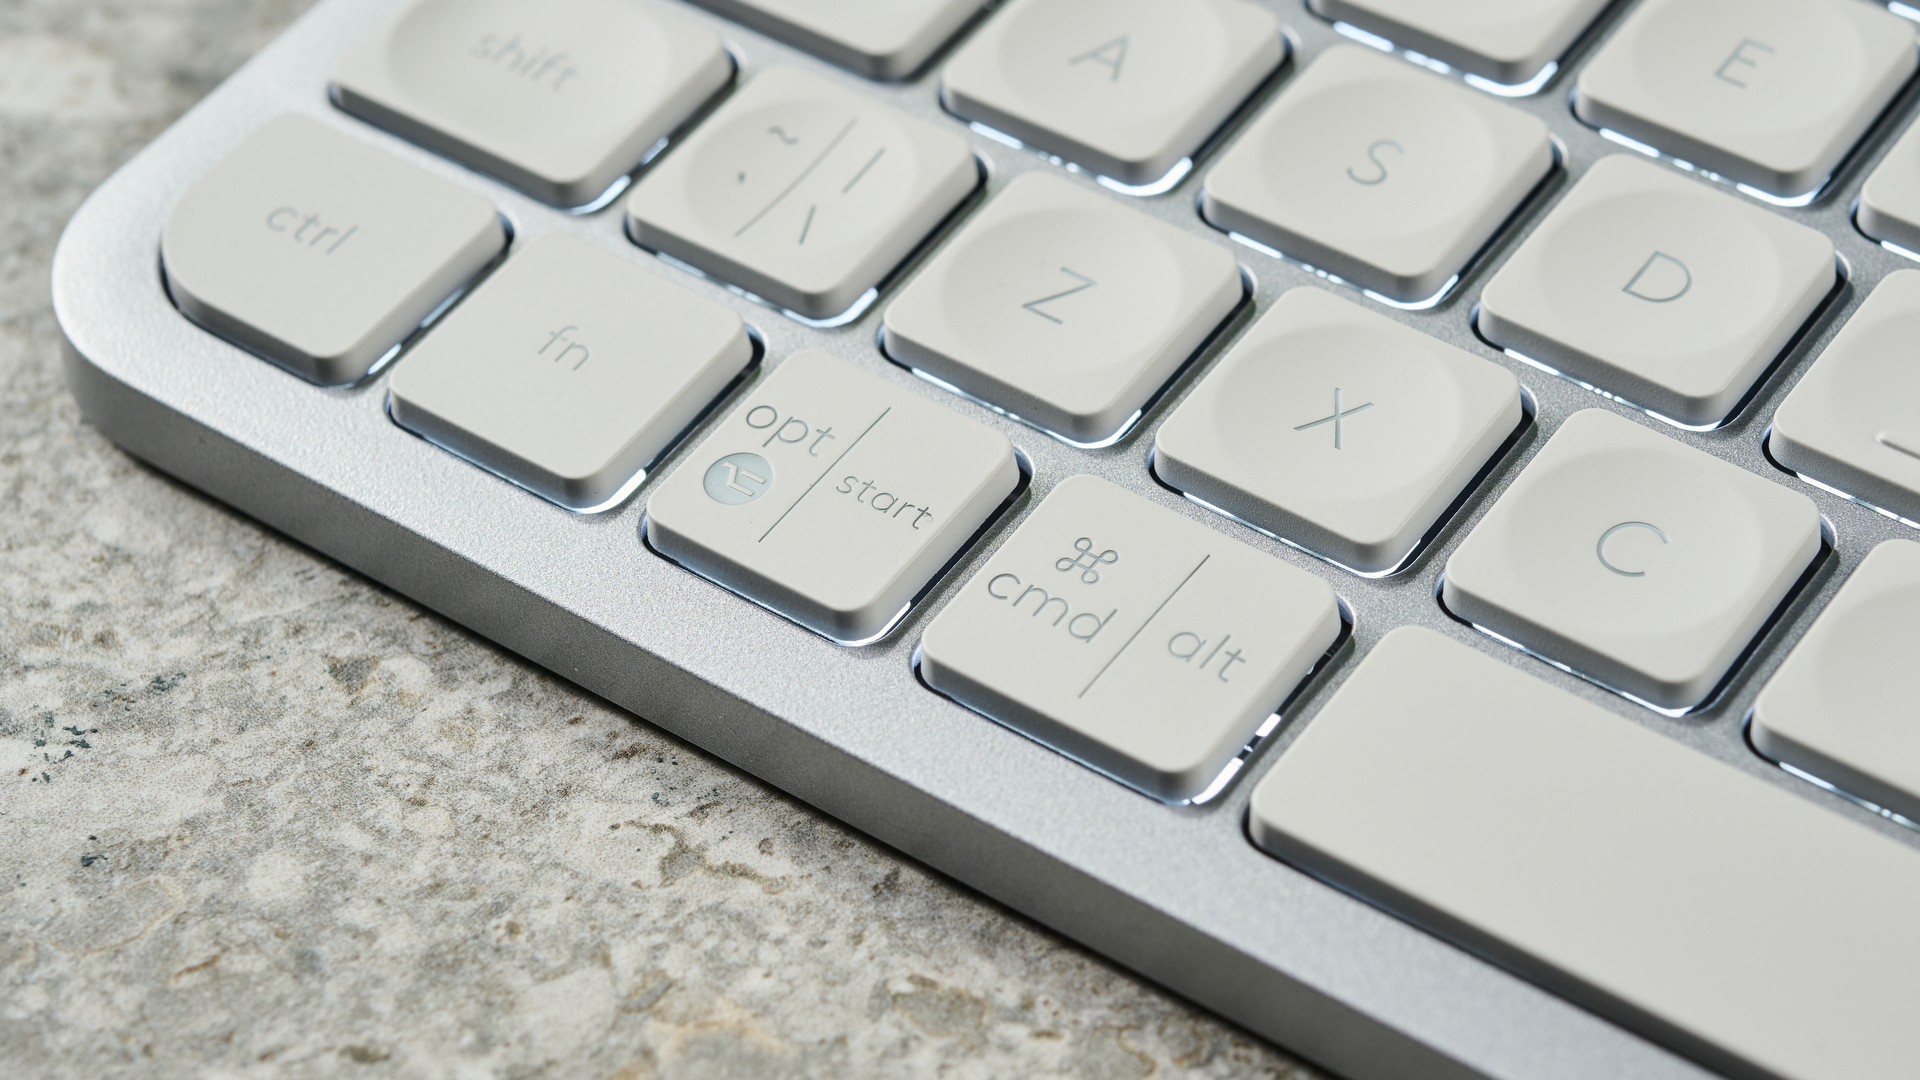 A photograph of the Logitech MX Keys Mini in light gray, positioned on a stone slab with a blue wall in the background.